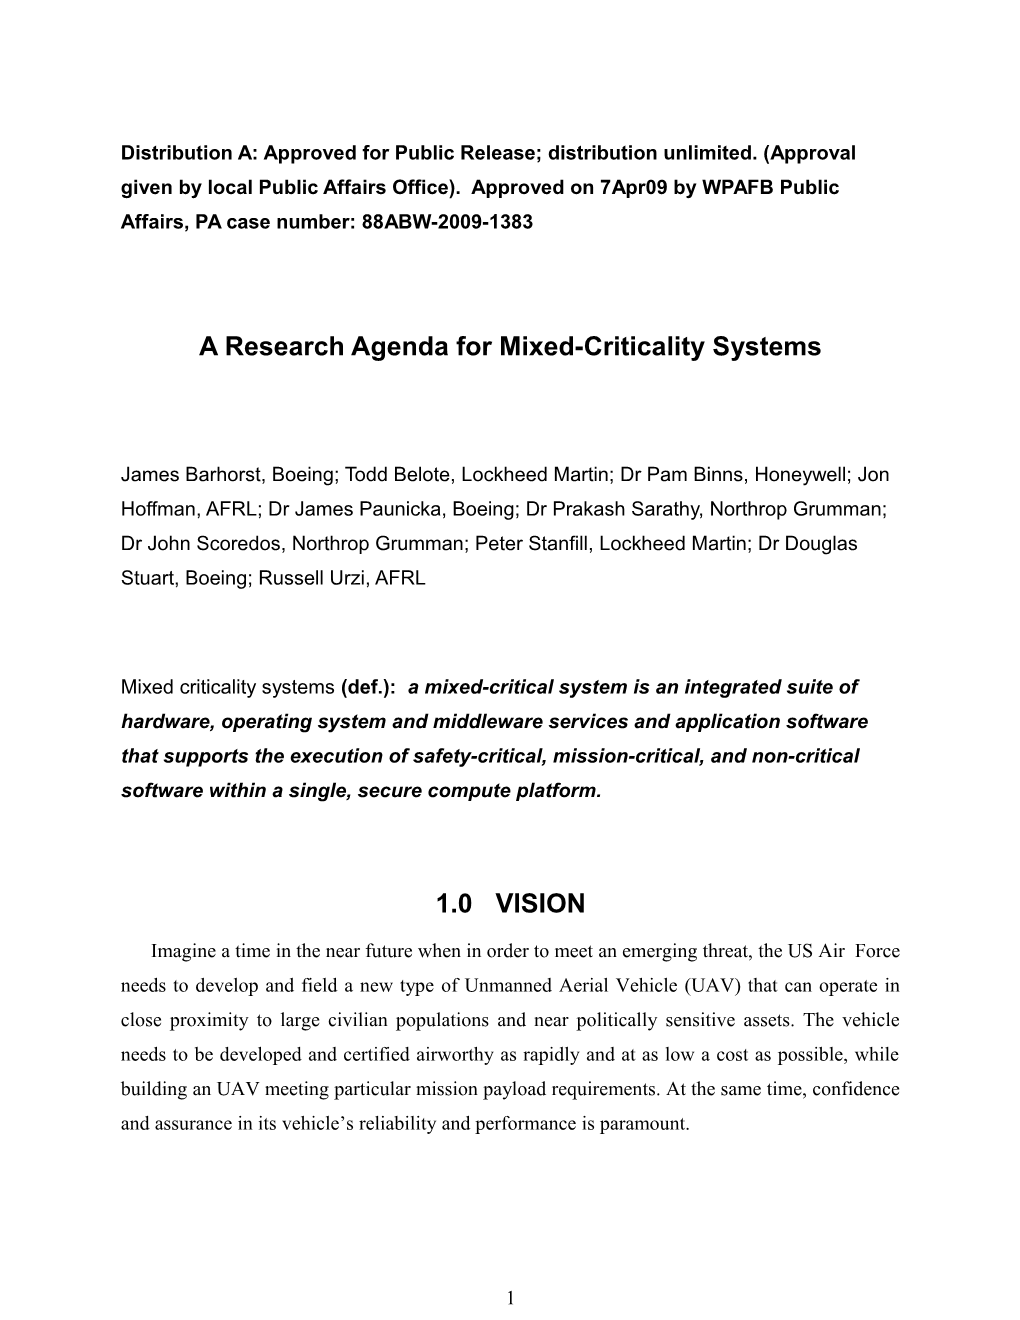 A Research Agenda for Mixed-Criticality Systems